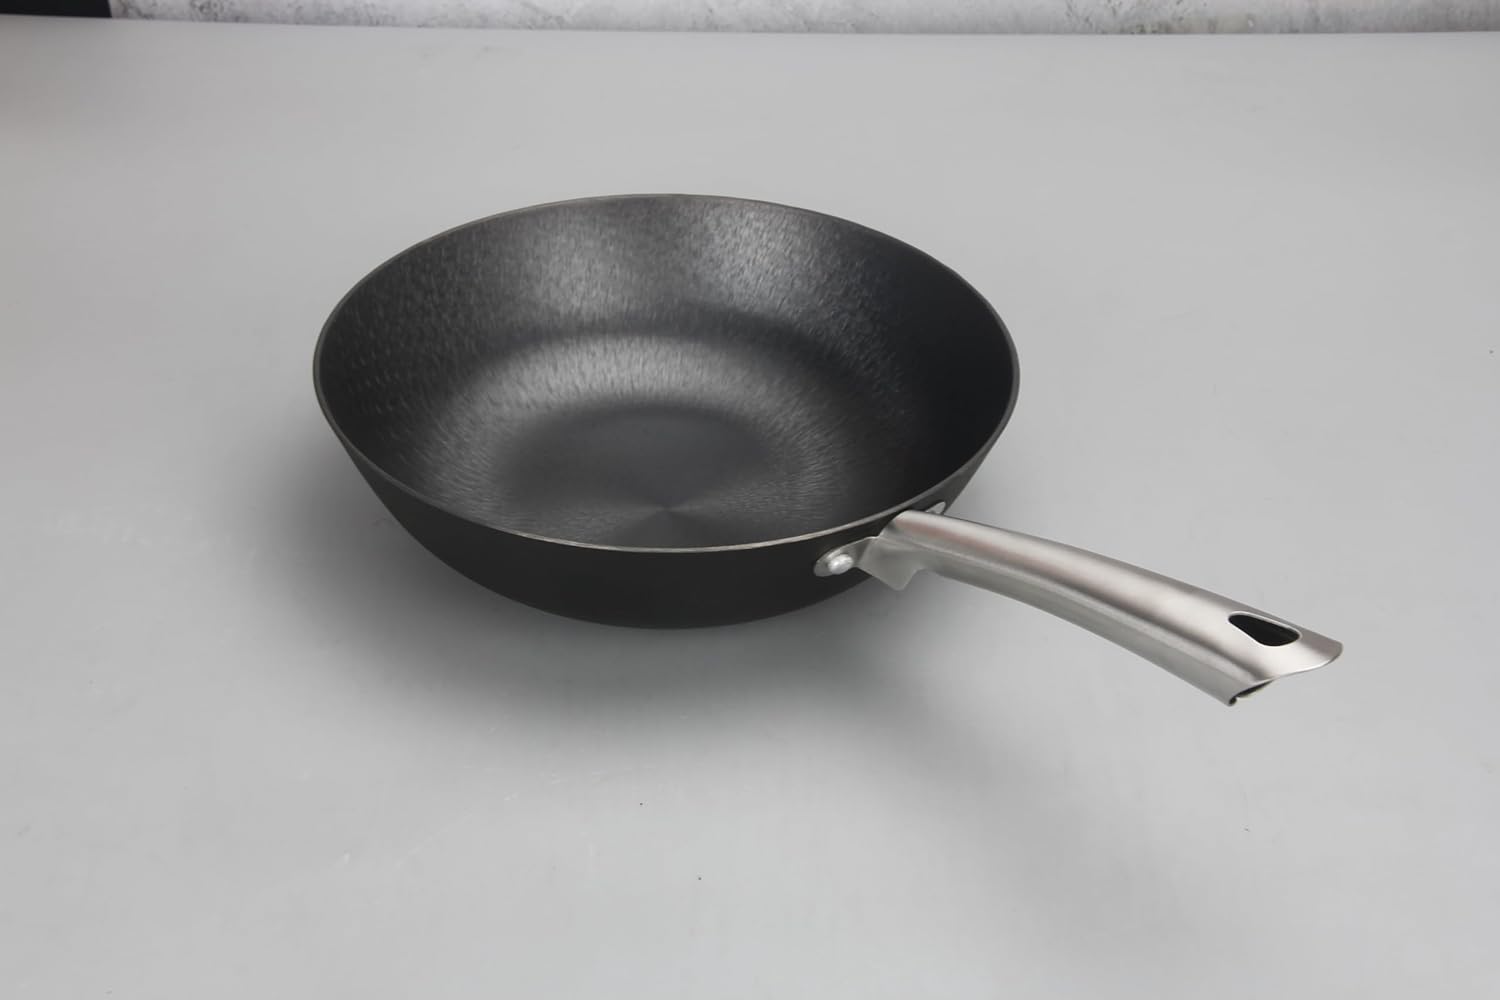 Preseasoned Cast Iron Fry Pan Wok of 28CM Diameter with Tough Handle Non Toxic and Coating Free-1 Pc